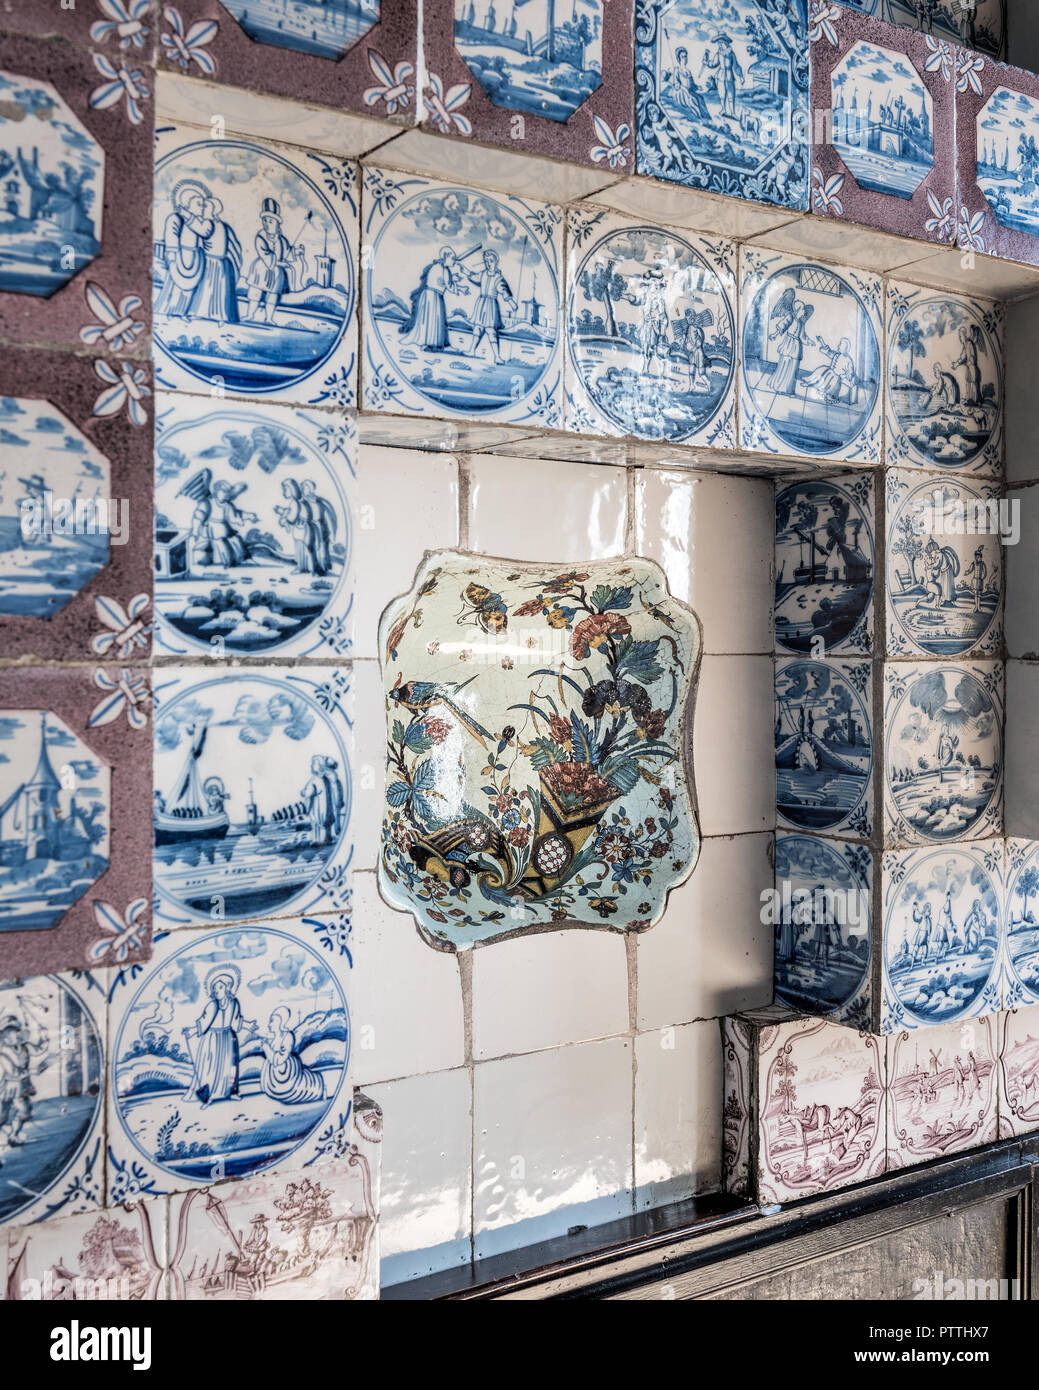 Dining room walls lined with delftware tiles in Hauteville House Stock Photo